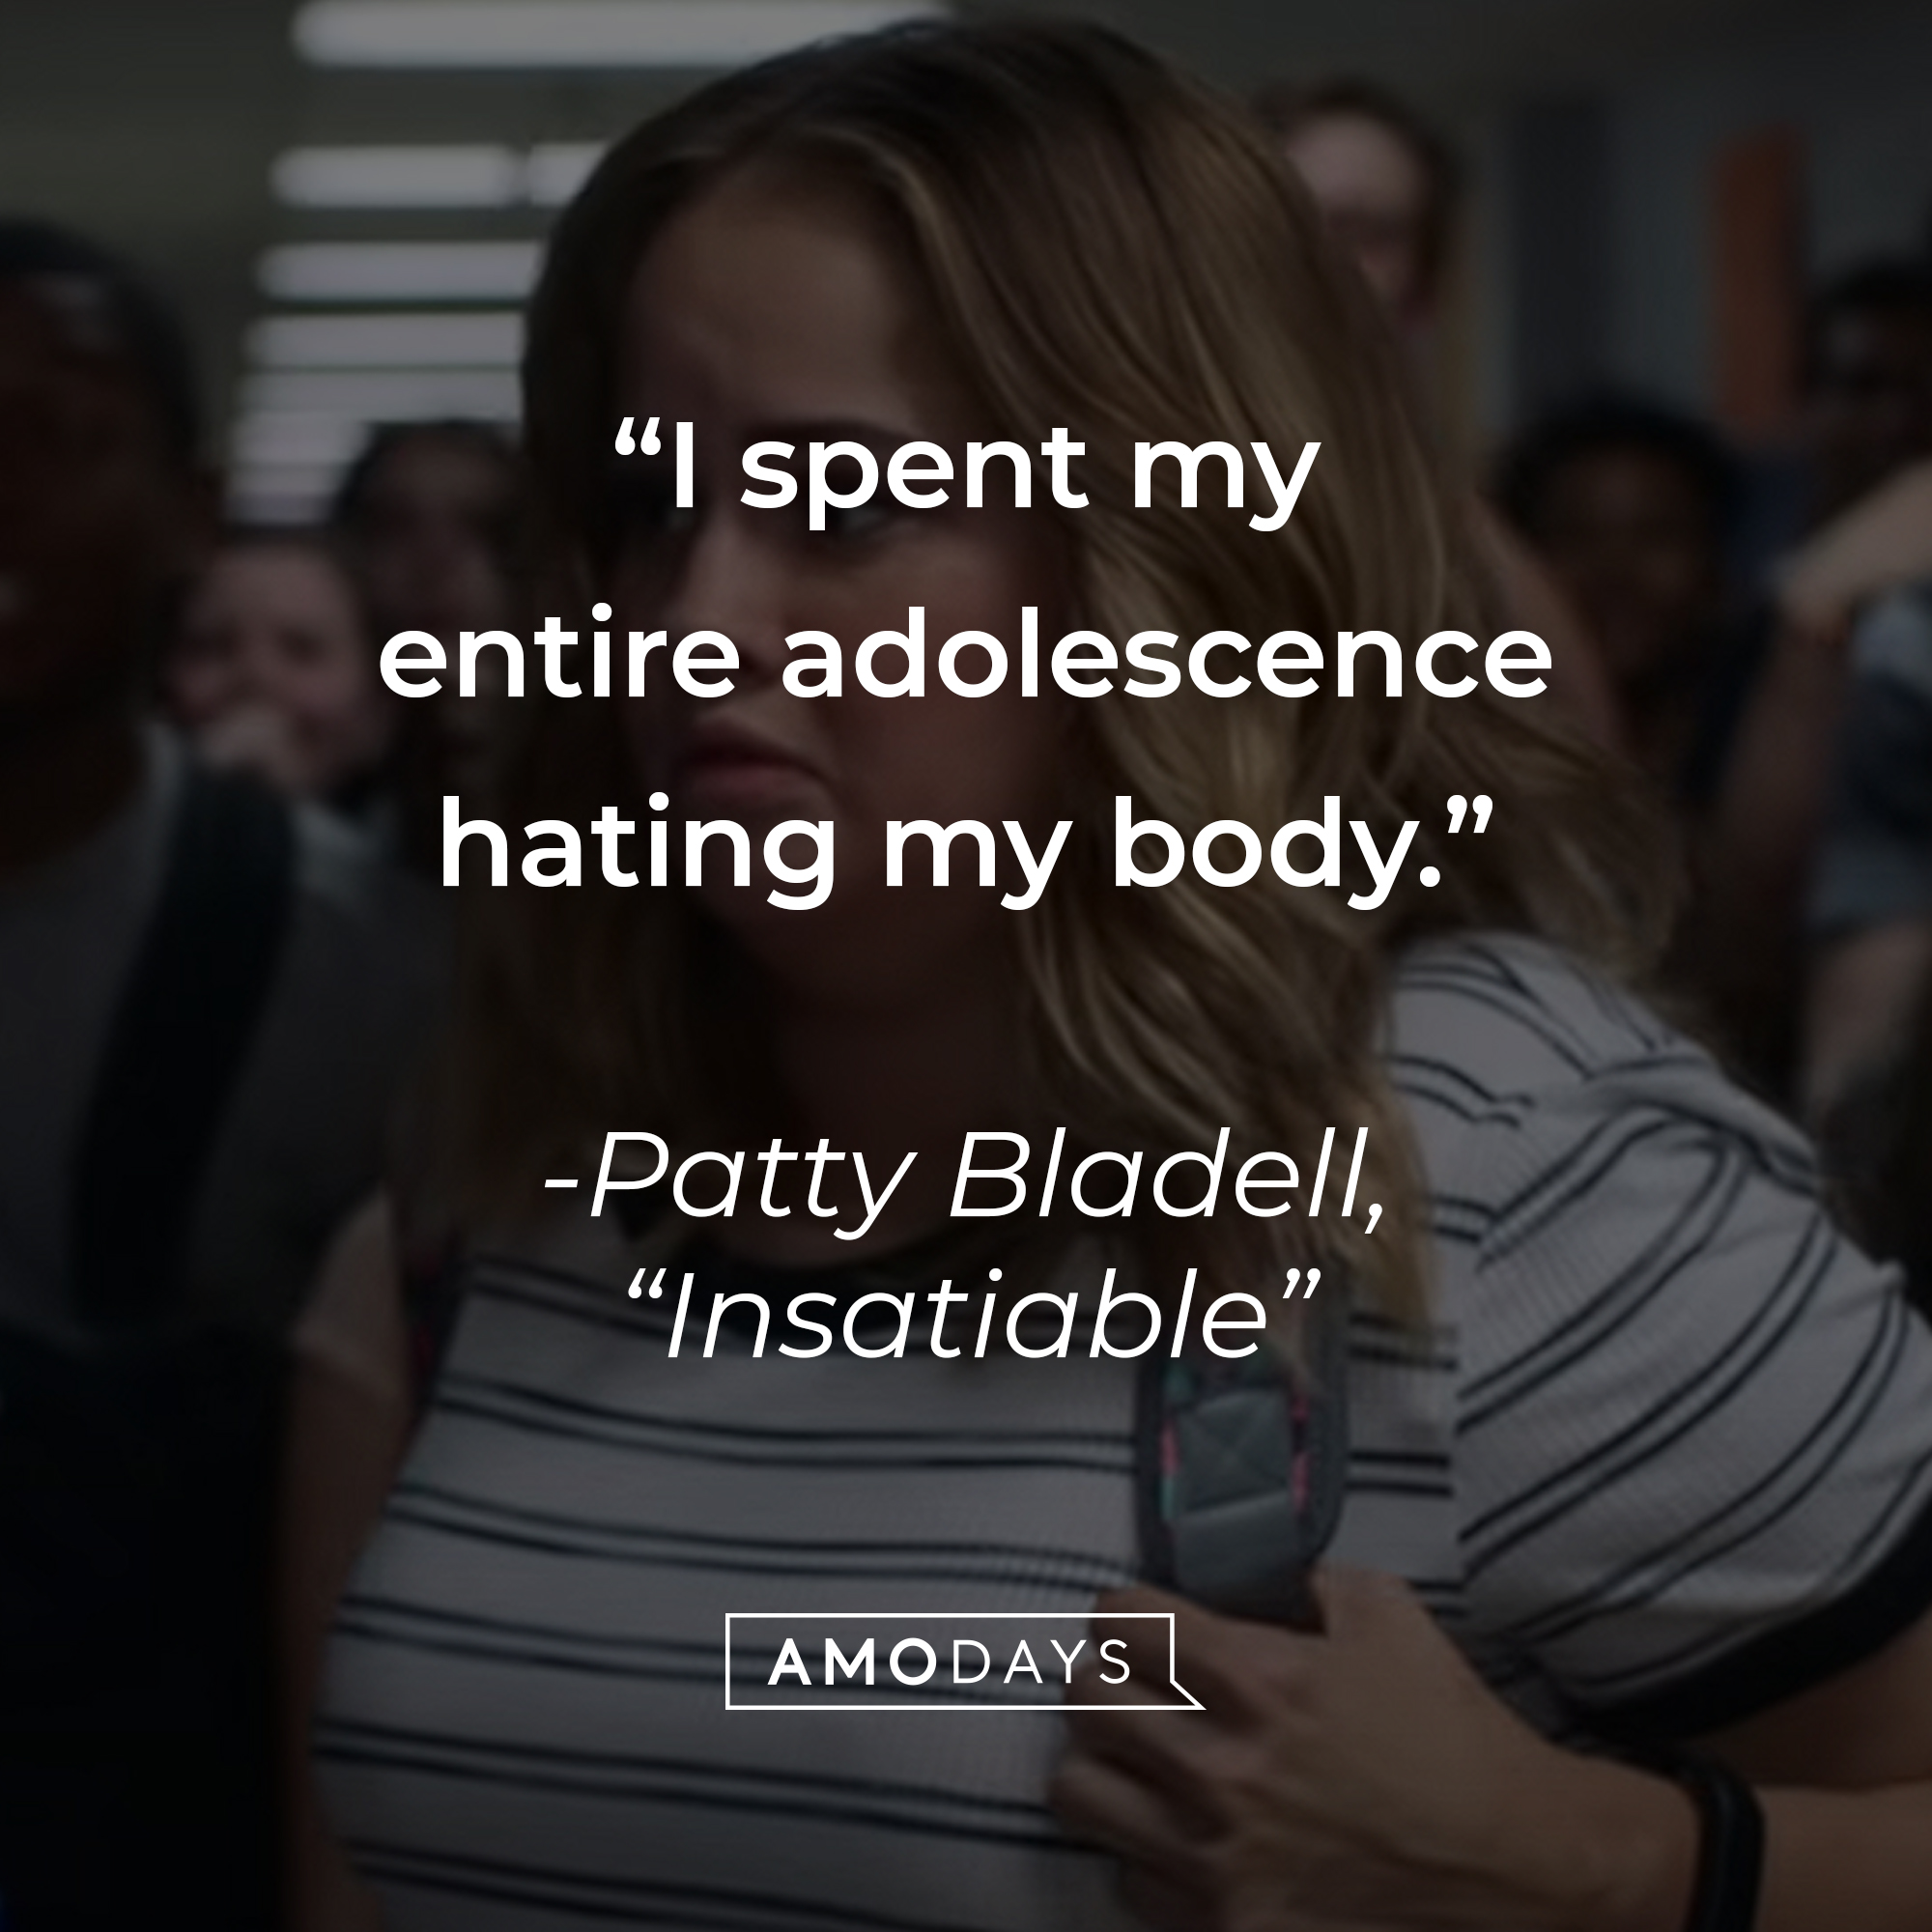 Patty Bladell with her quote on "Insatiable:" “I spent my entire adolescence hating my body." | Source: Youtube.com/Netflix